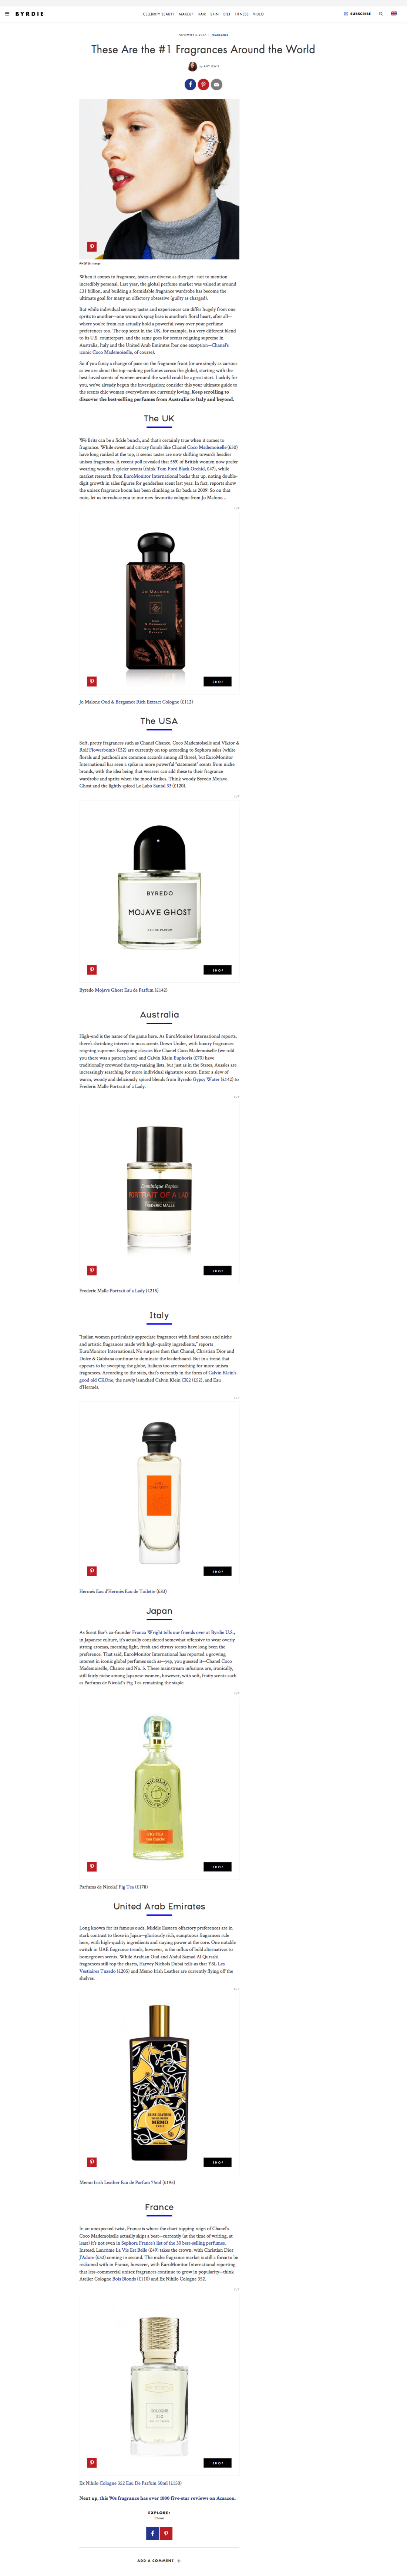 These_Are_the_Best-Selling_Perfumes_Around_the_World_Byrdie_UK_-_2018-01-14_19.23.29